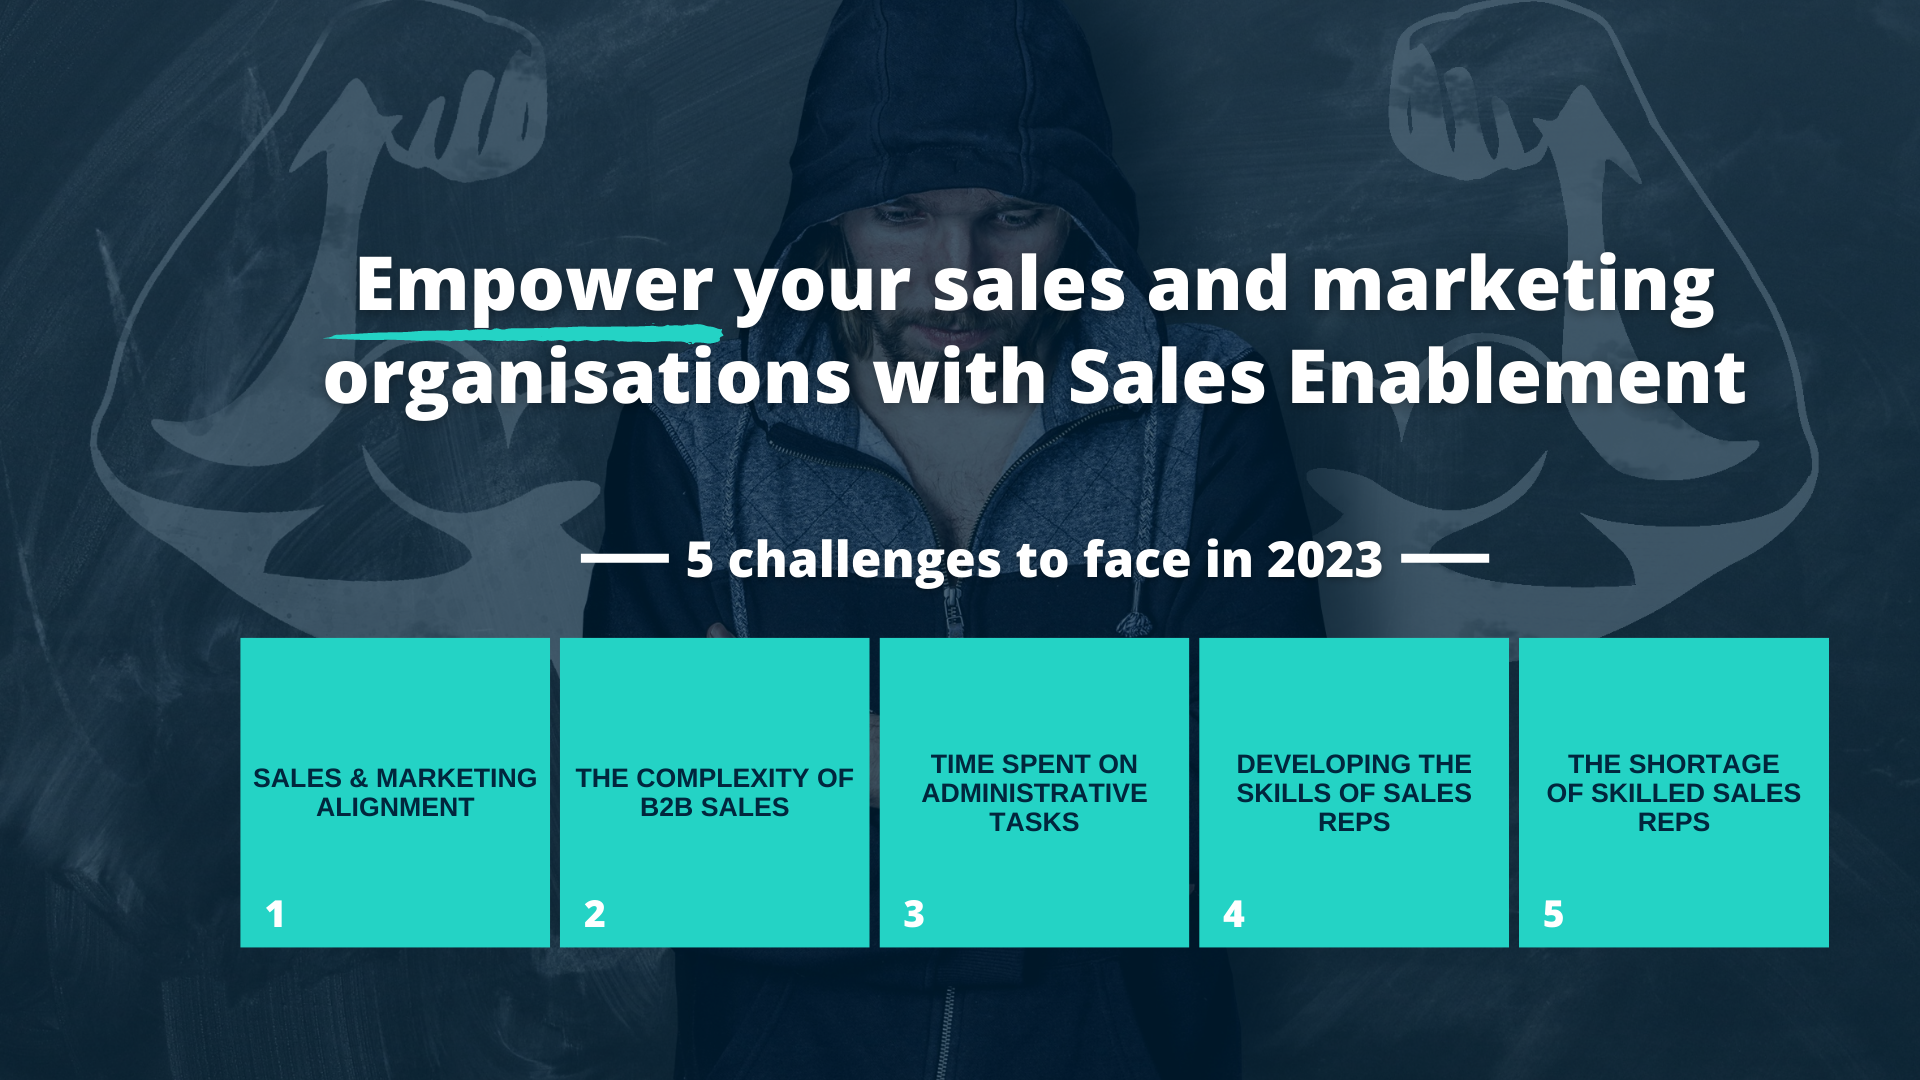 Why is Sales Enablement important?